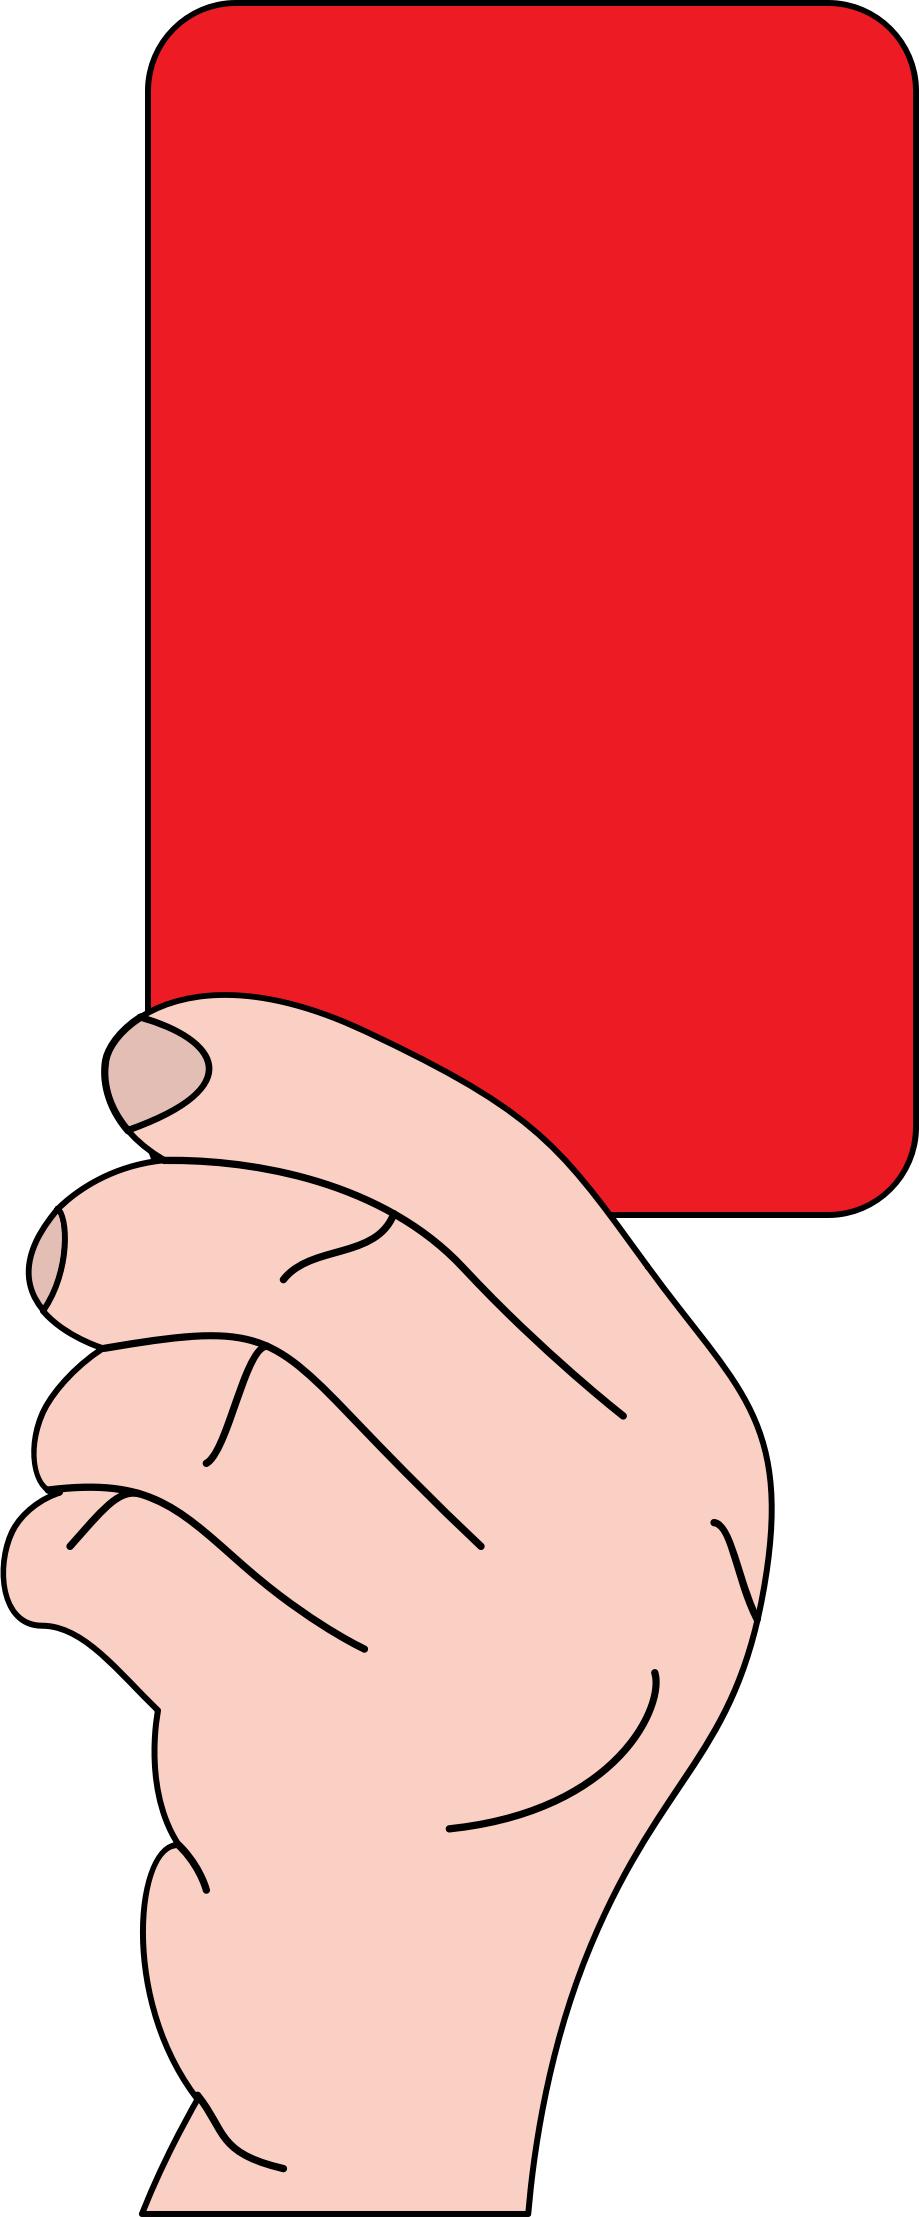 Referee showing red card png